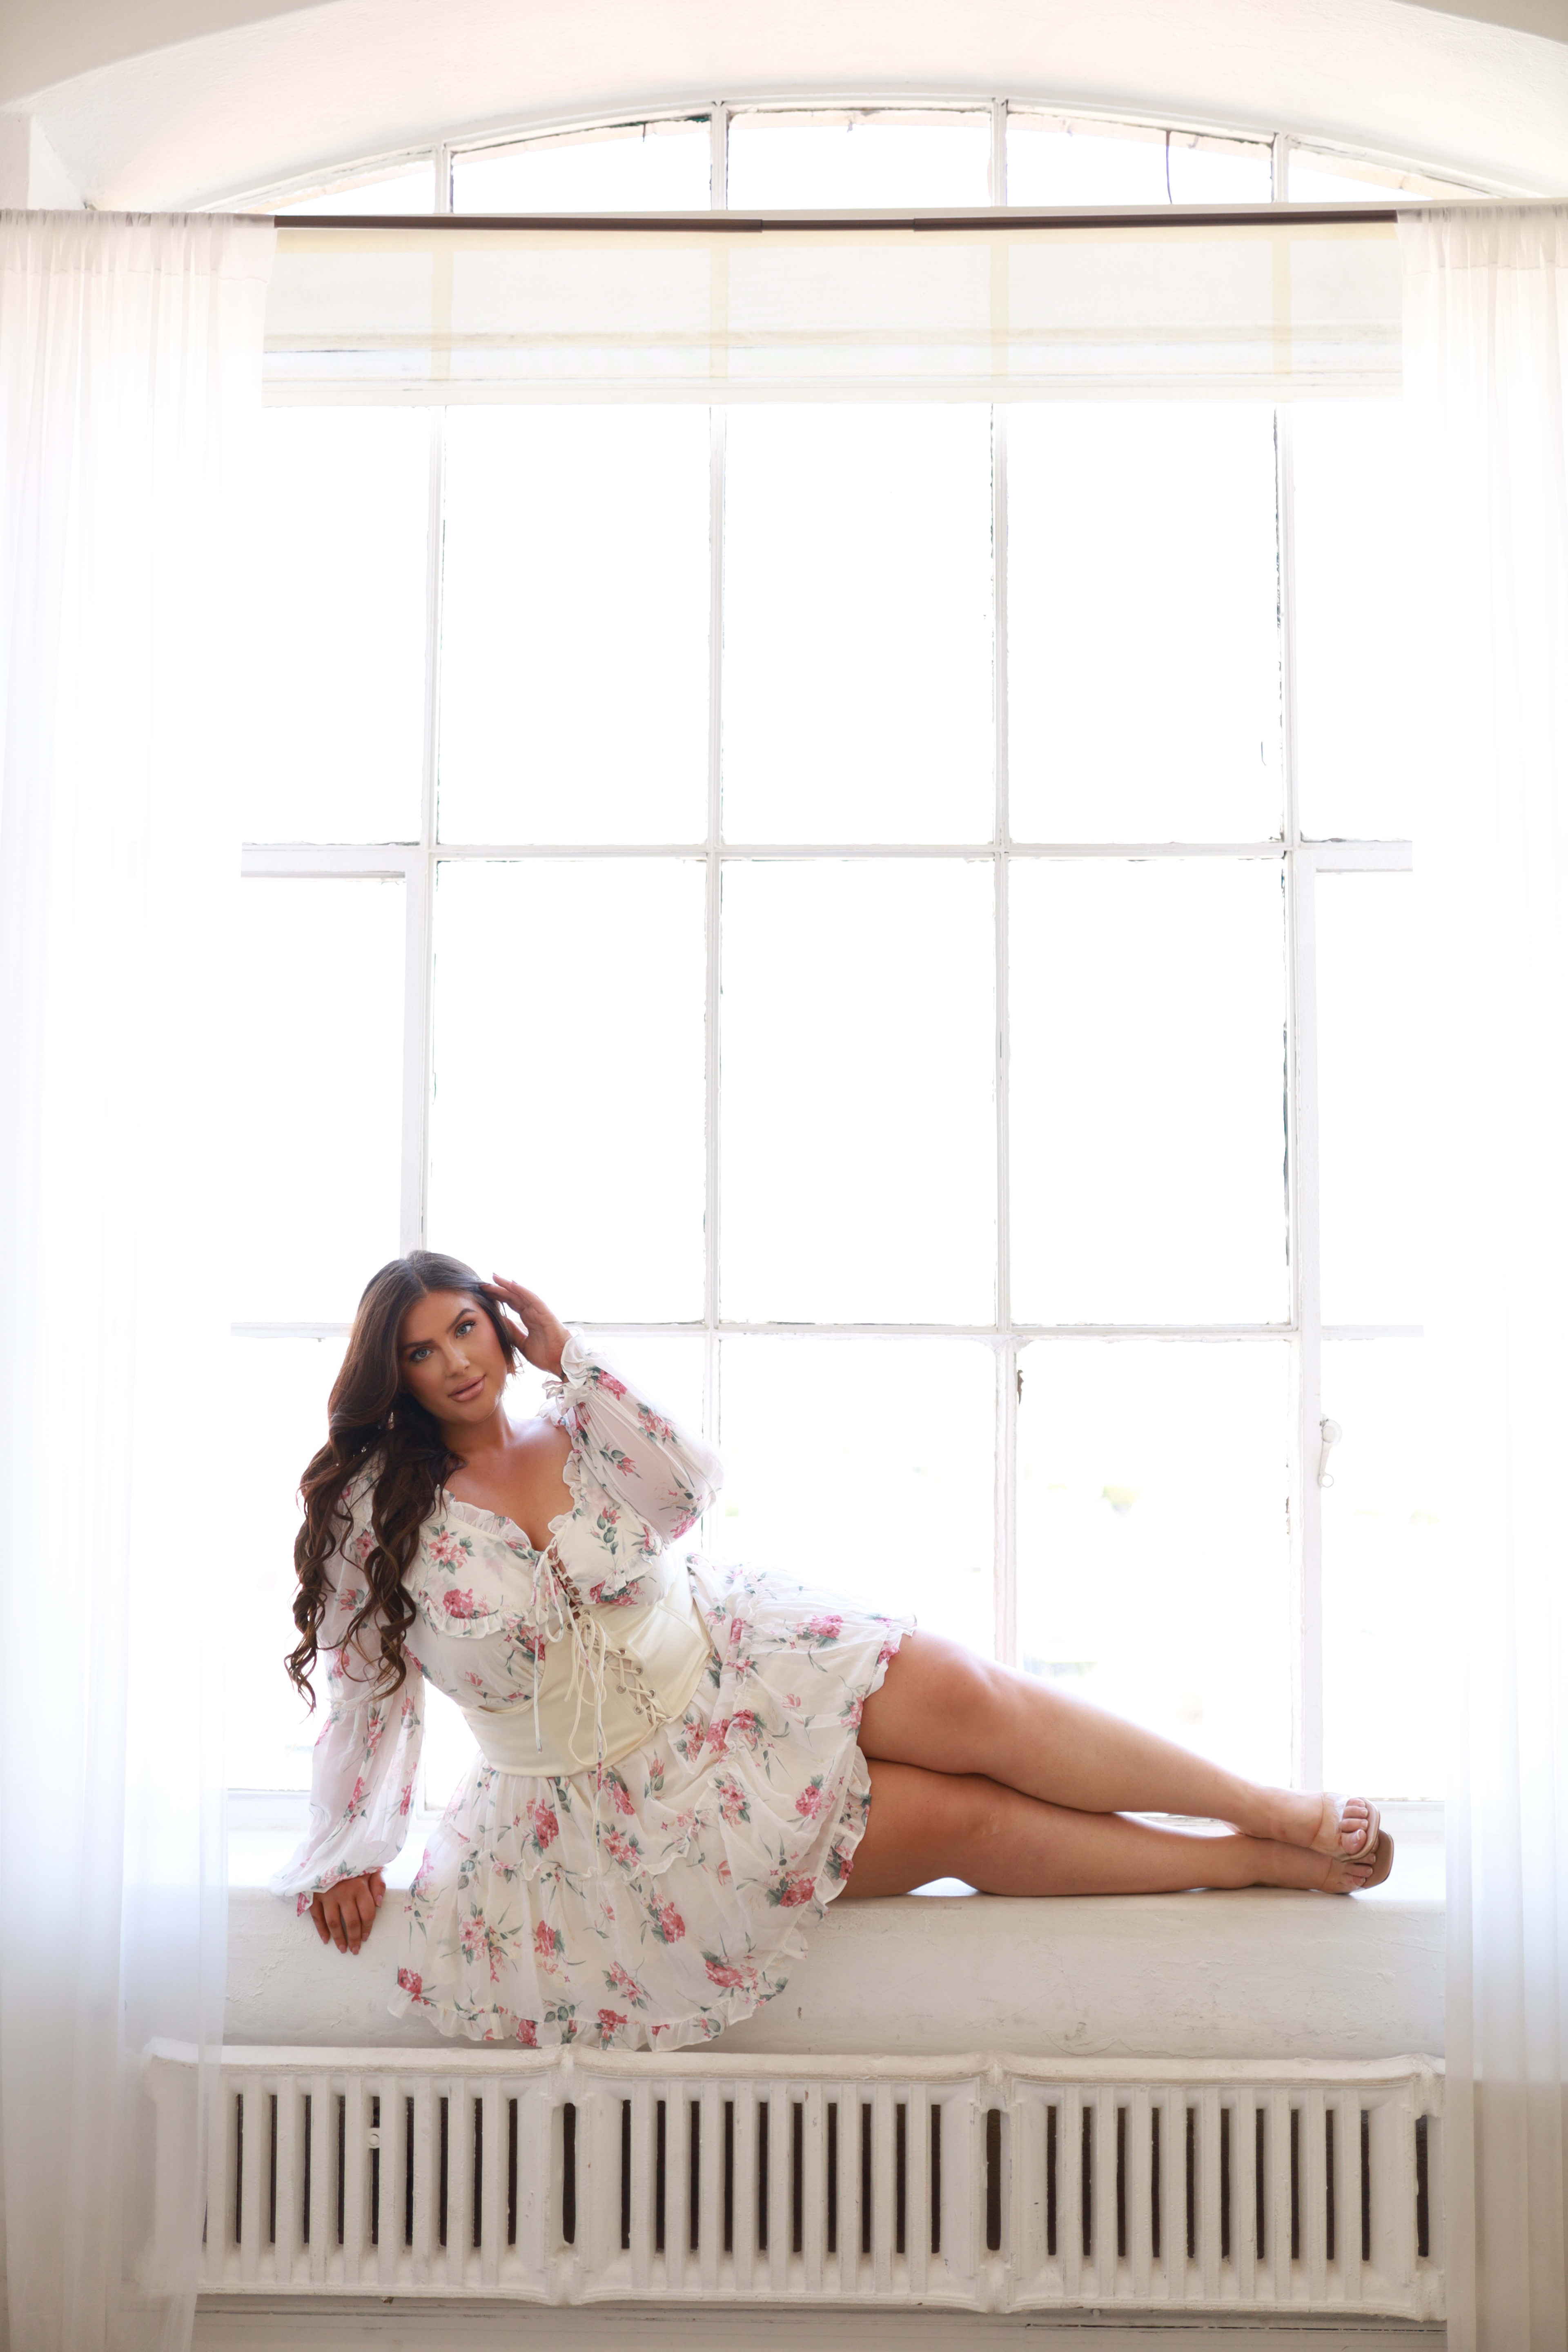 A woman posing for a renaissance fashion photoshoot in a white dress while sitting on a window sill.